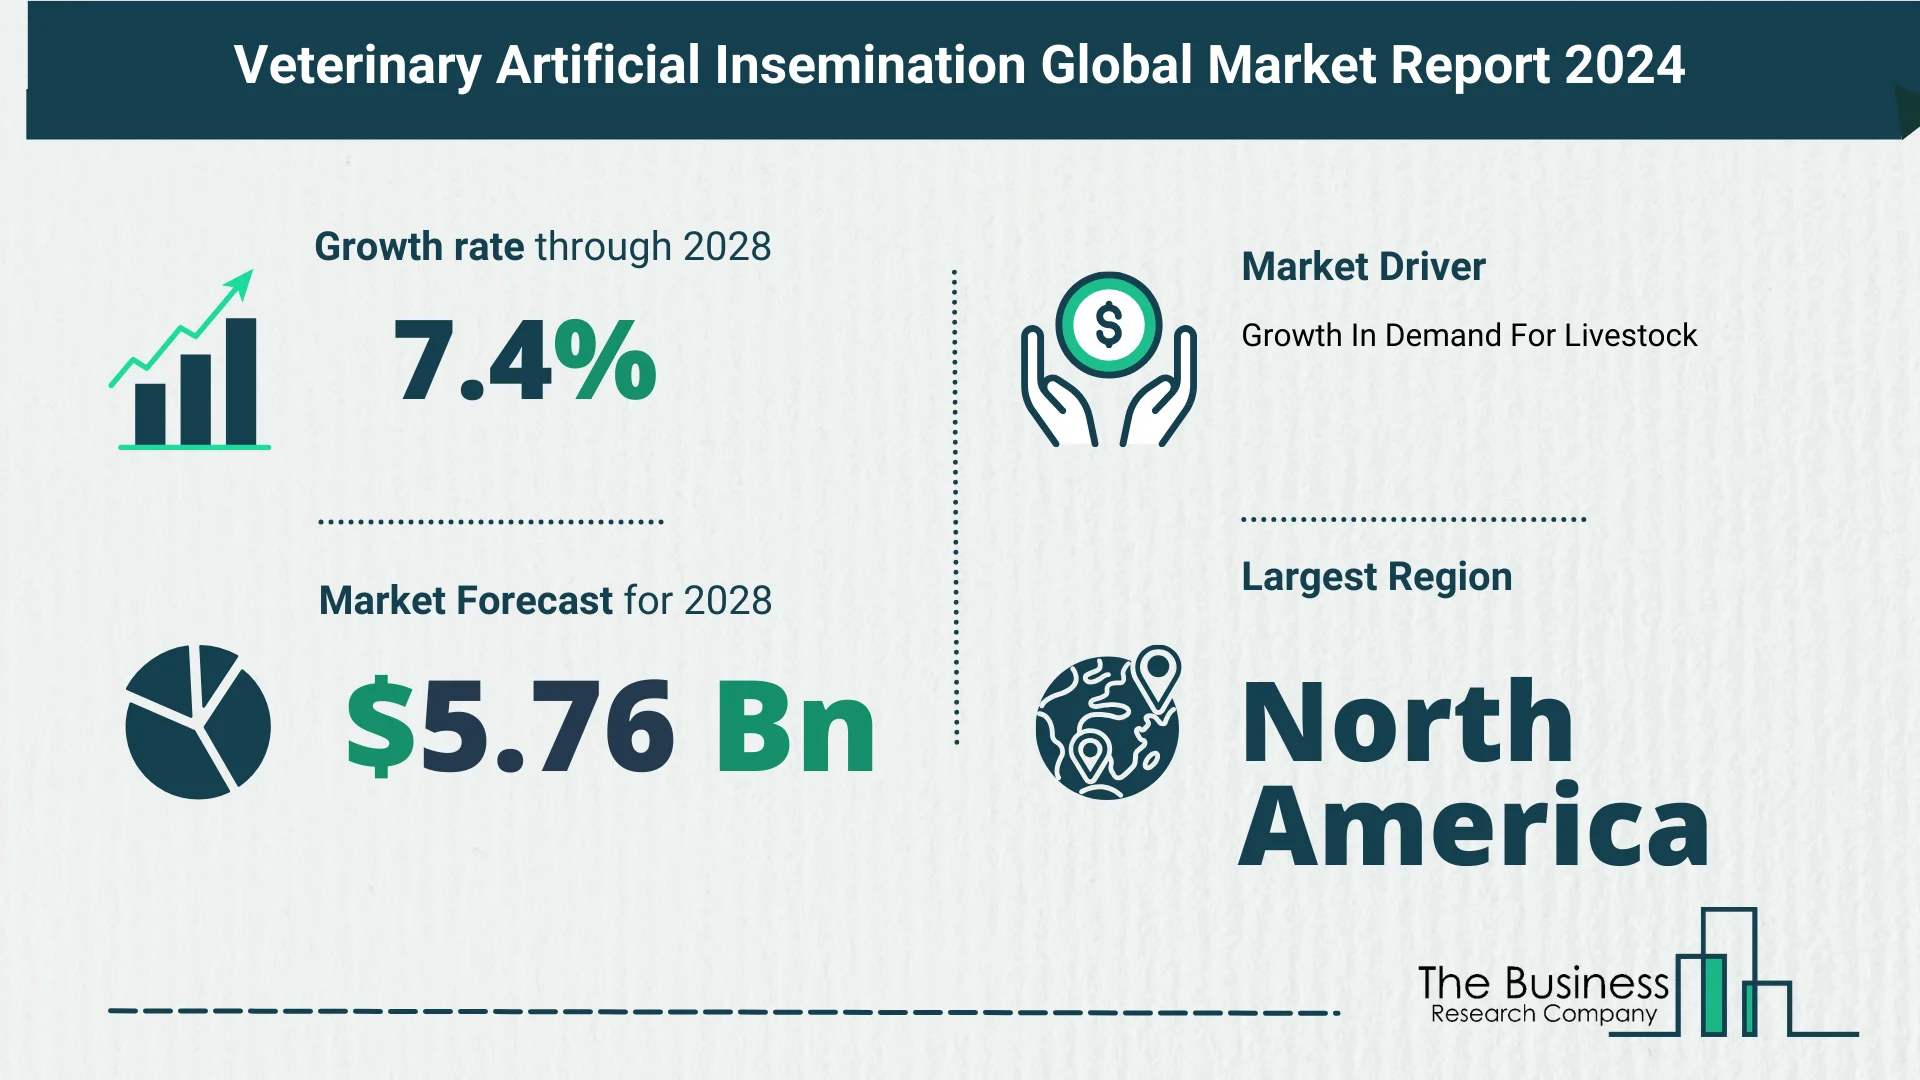 What Is The Forecast Growth Rate For The Veterinary Artificial Insemination Market?